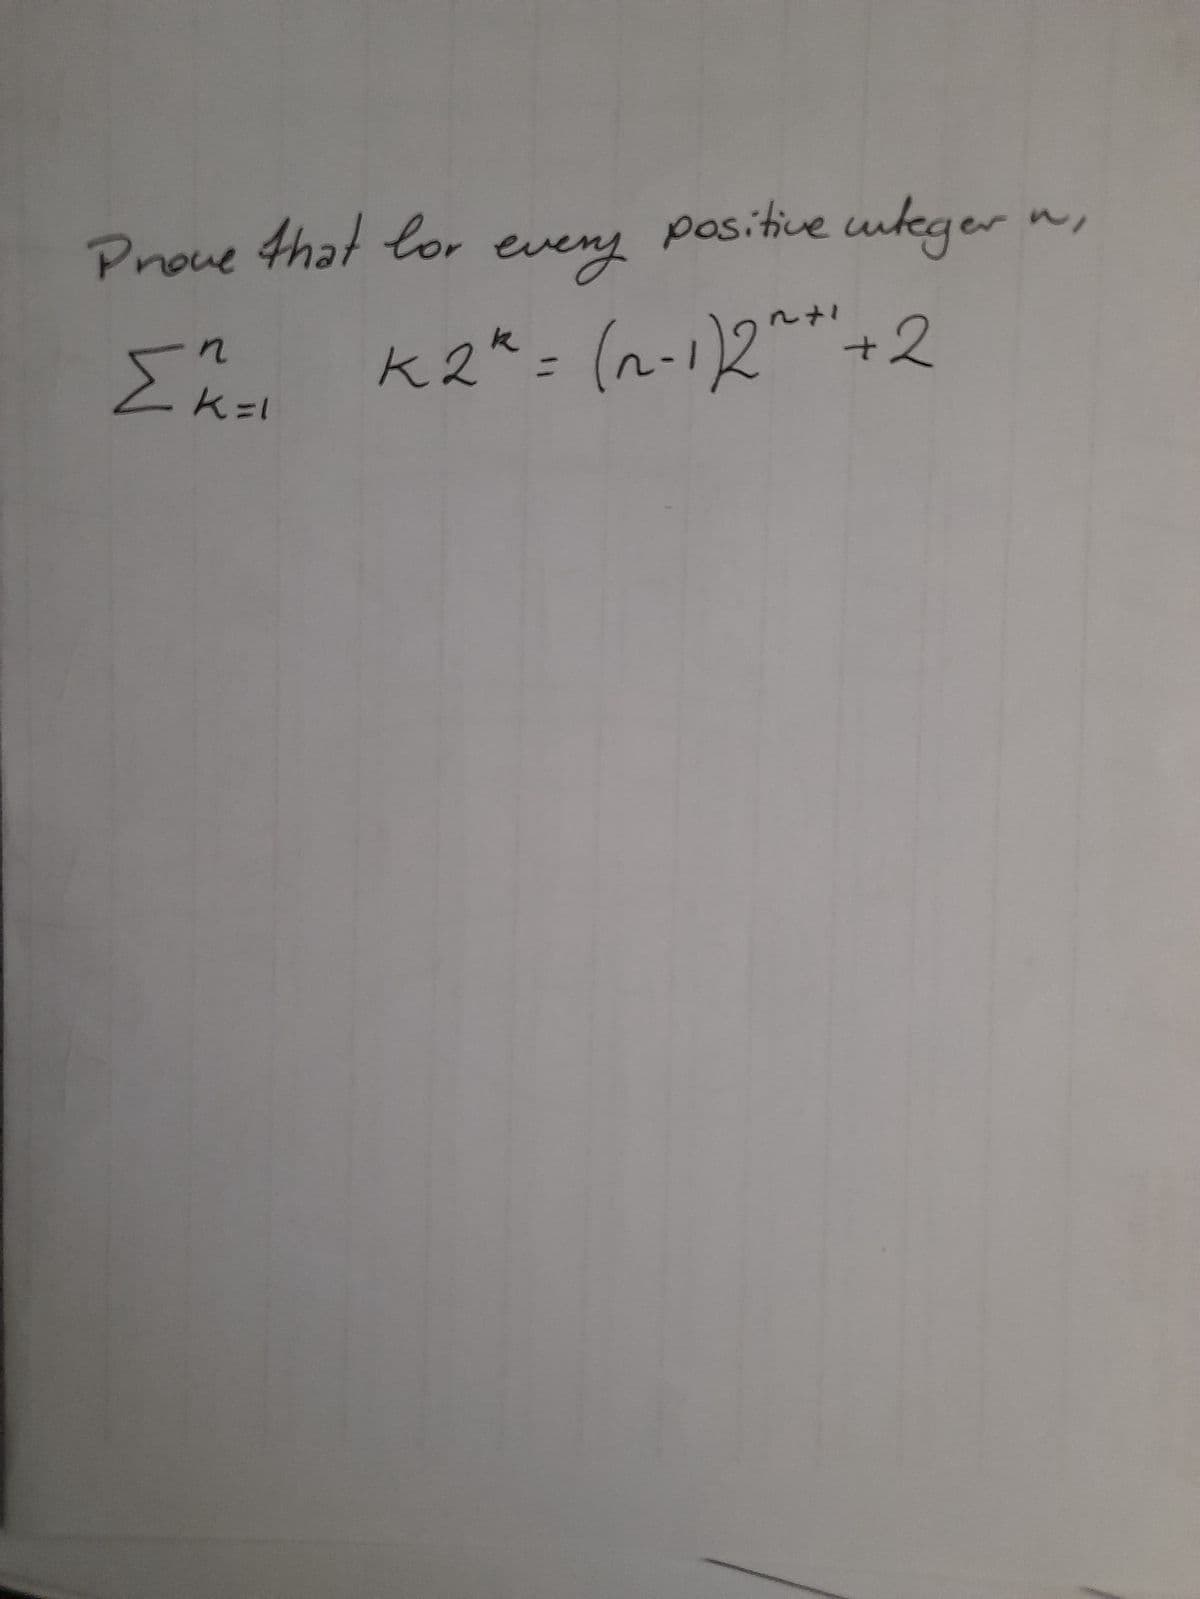 Prove that lor
every
positive unteger
n
Σ^²=1 K2²² = (2-1)2+²+2